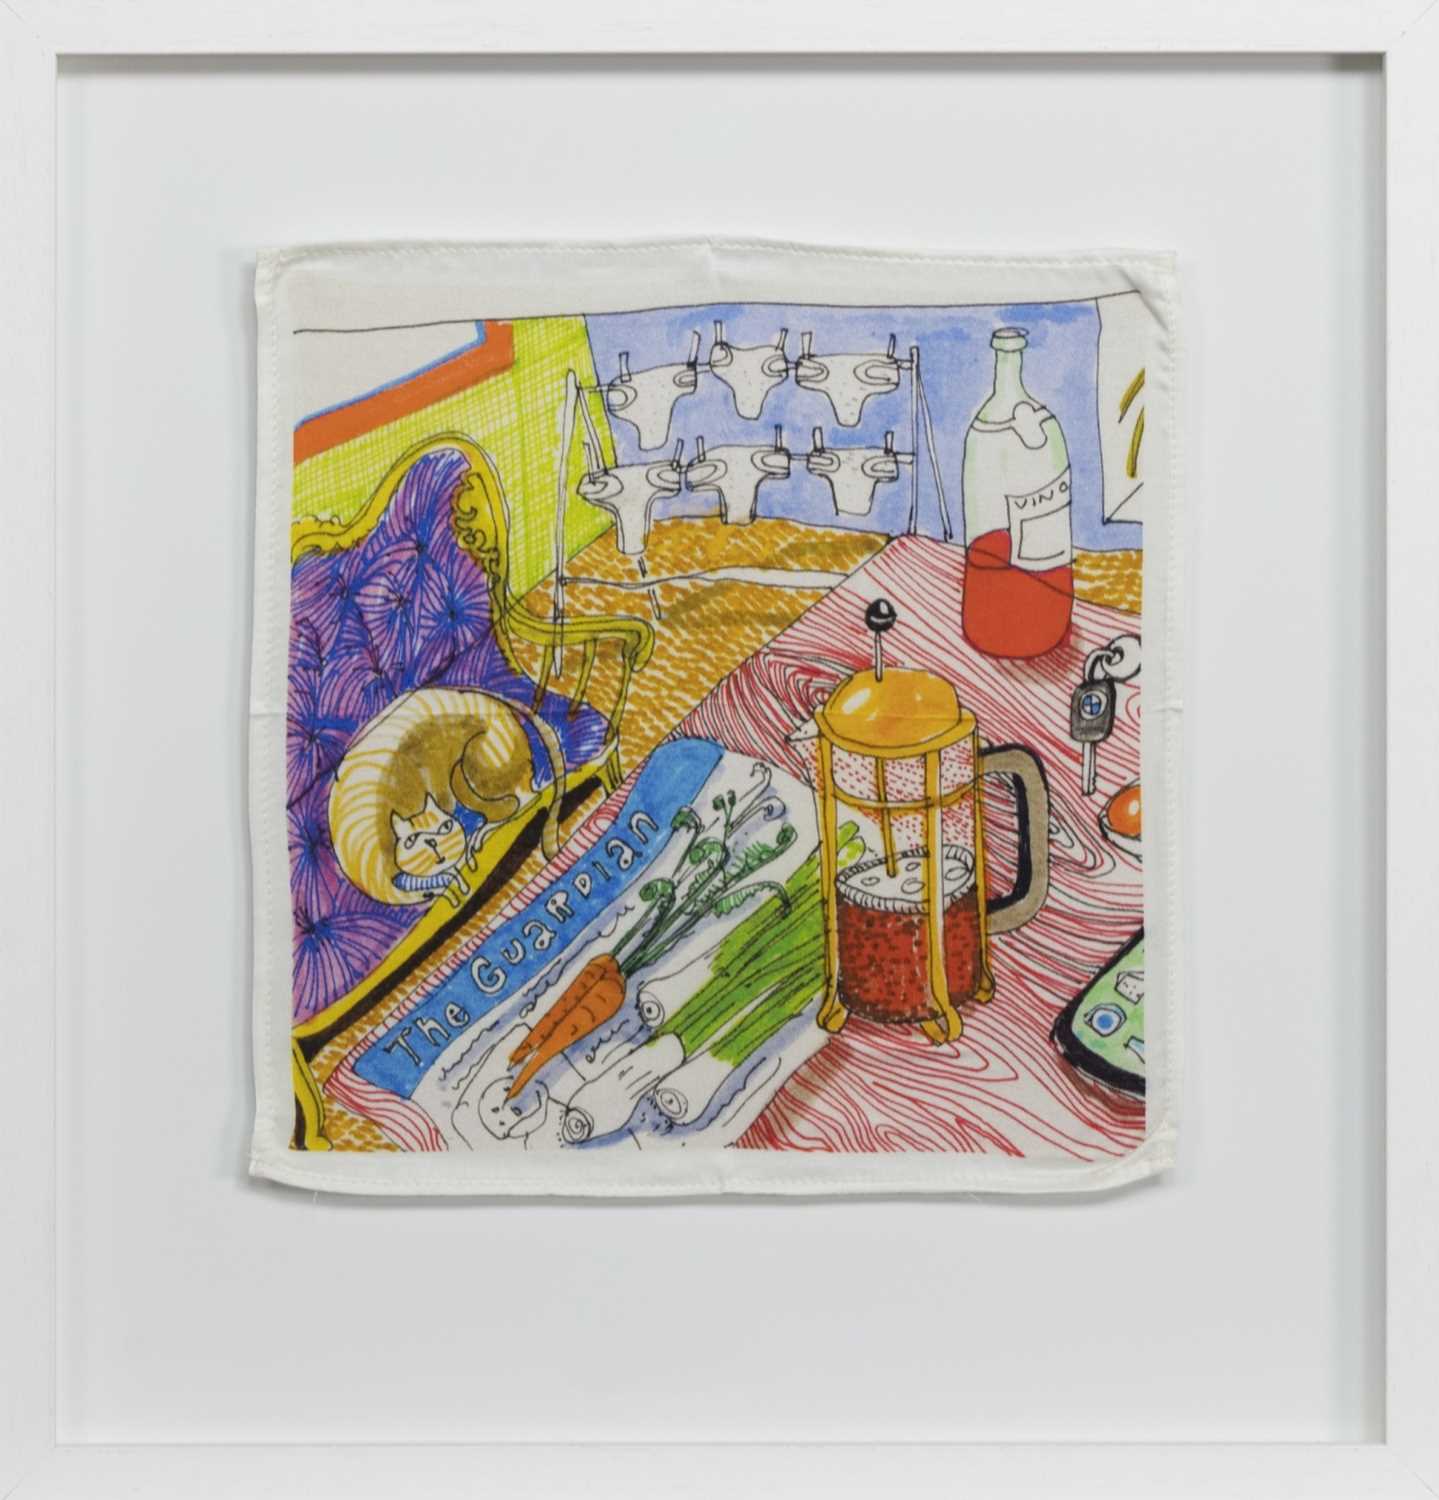 THE VANITY OF SMALL DIFFERENCES, A HANDKERCHIEF BY GRAYSON PERRY